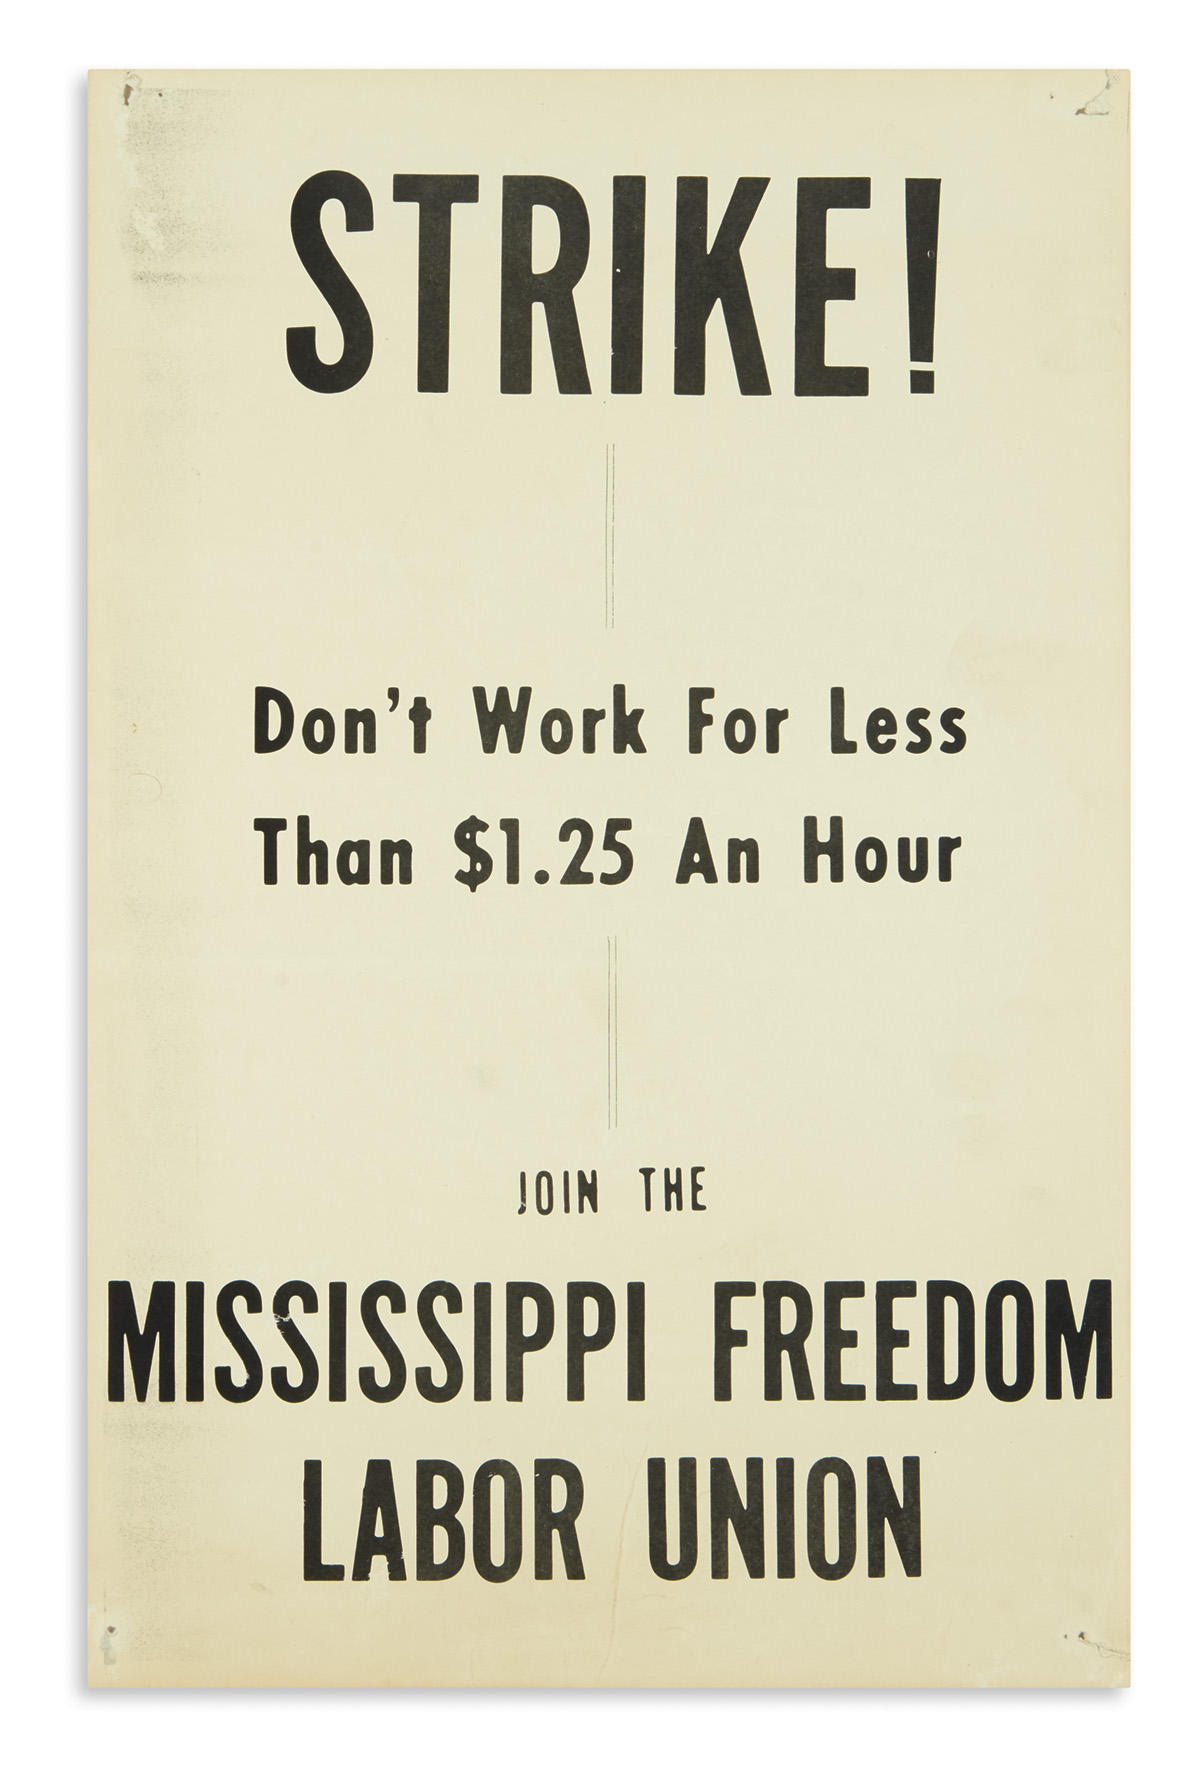 (CIVIL RIGHTS.) Strike! Dont Work for Less than $1.25 an Hour. Join the Mississippi Freedom Labor Union.